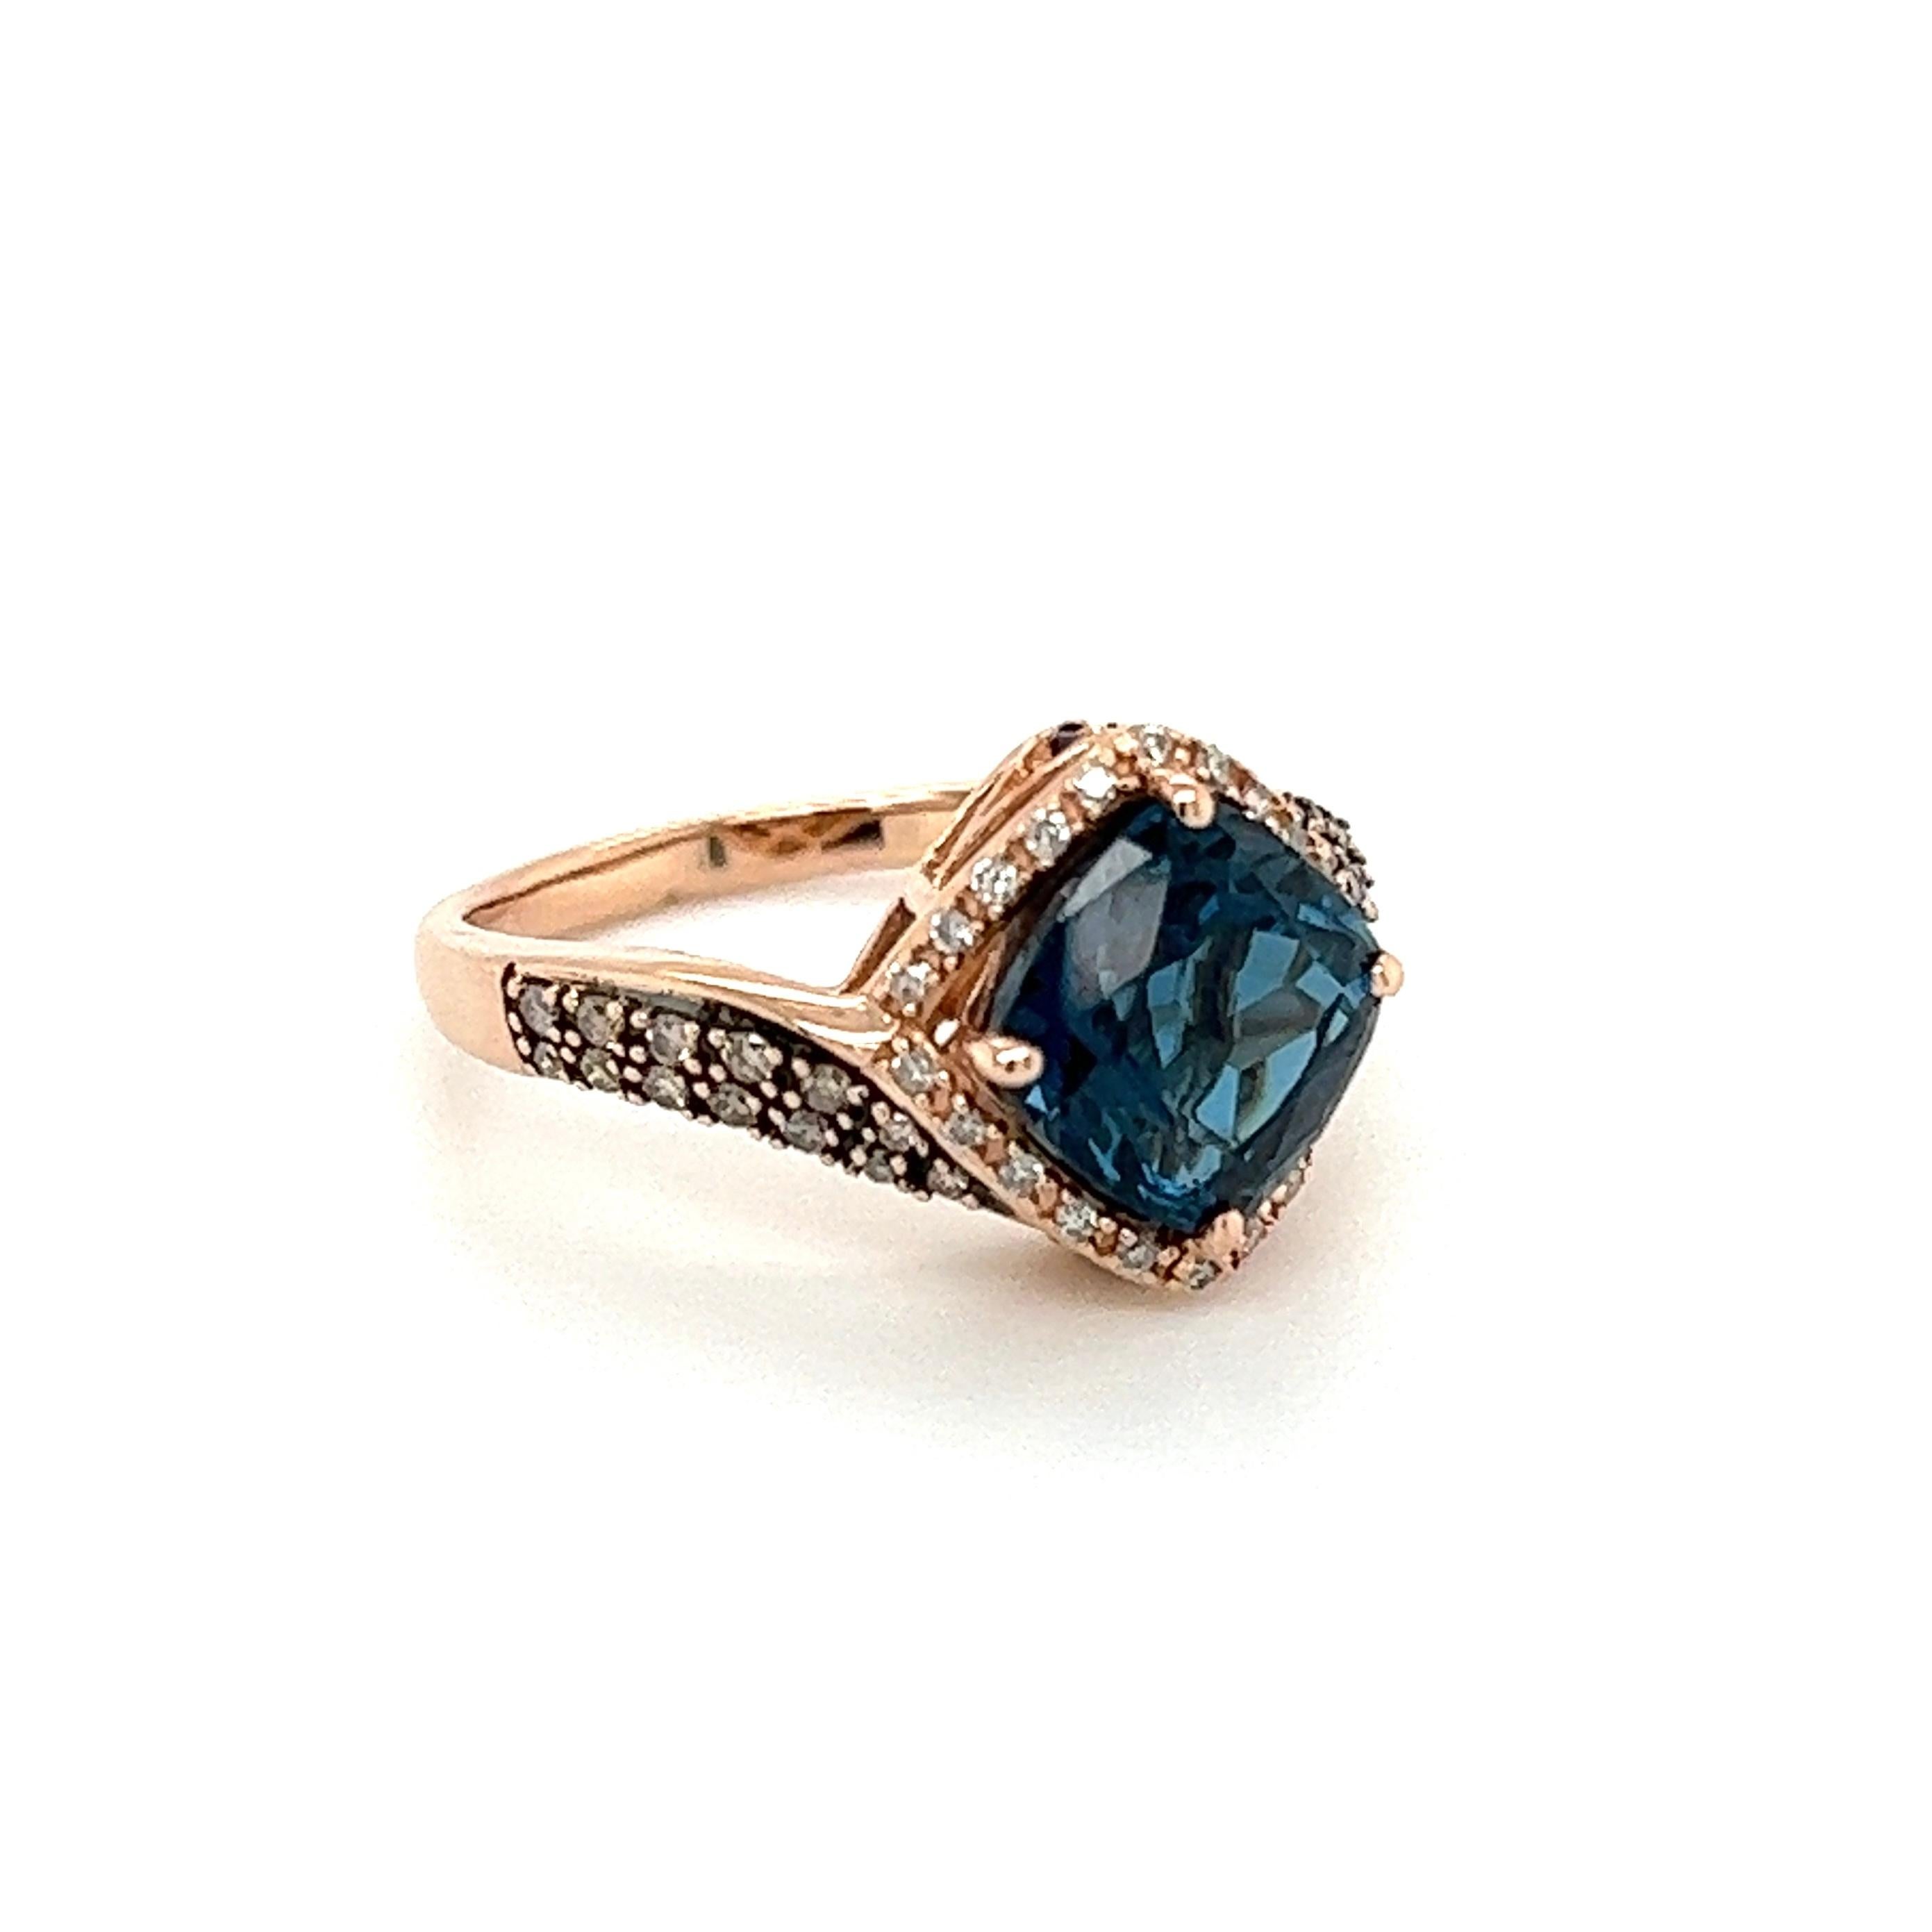 Simply Beautiful! Finely detailed London Blue Topaz and Diamond Gold Cocktail Ring. Centering a securely nestled London Blue Topaz, approx. 2 Carat, surrounded by Champagne and White Diamonds, approx. 0.55tcw. Hand crafted 14K Rose Gold mounting.